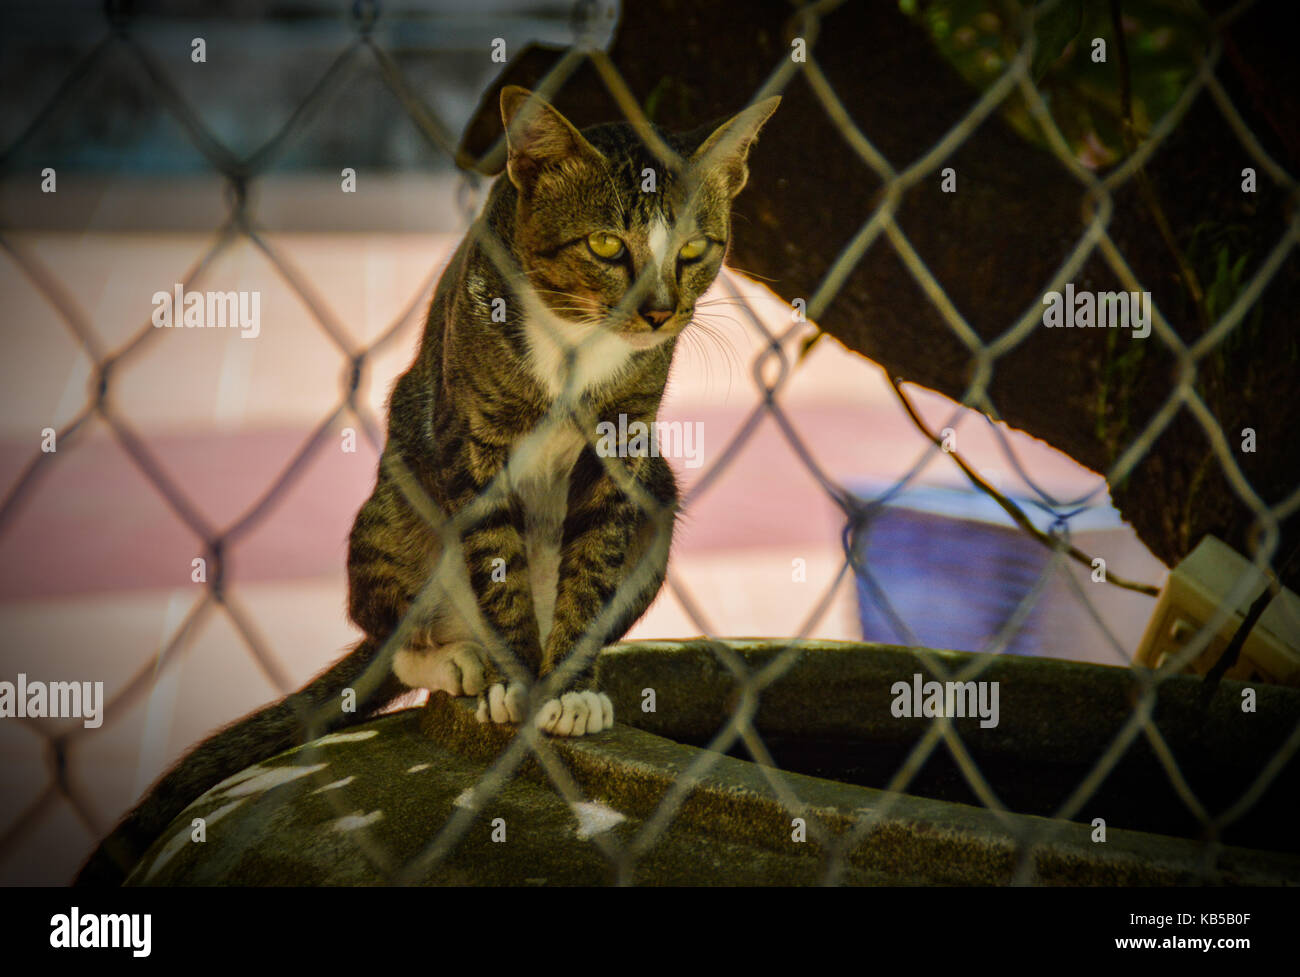 A stray cat behind a chain link fence, showing homelessness and neglect Stock Photo